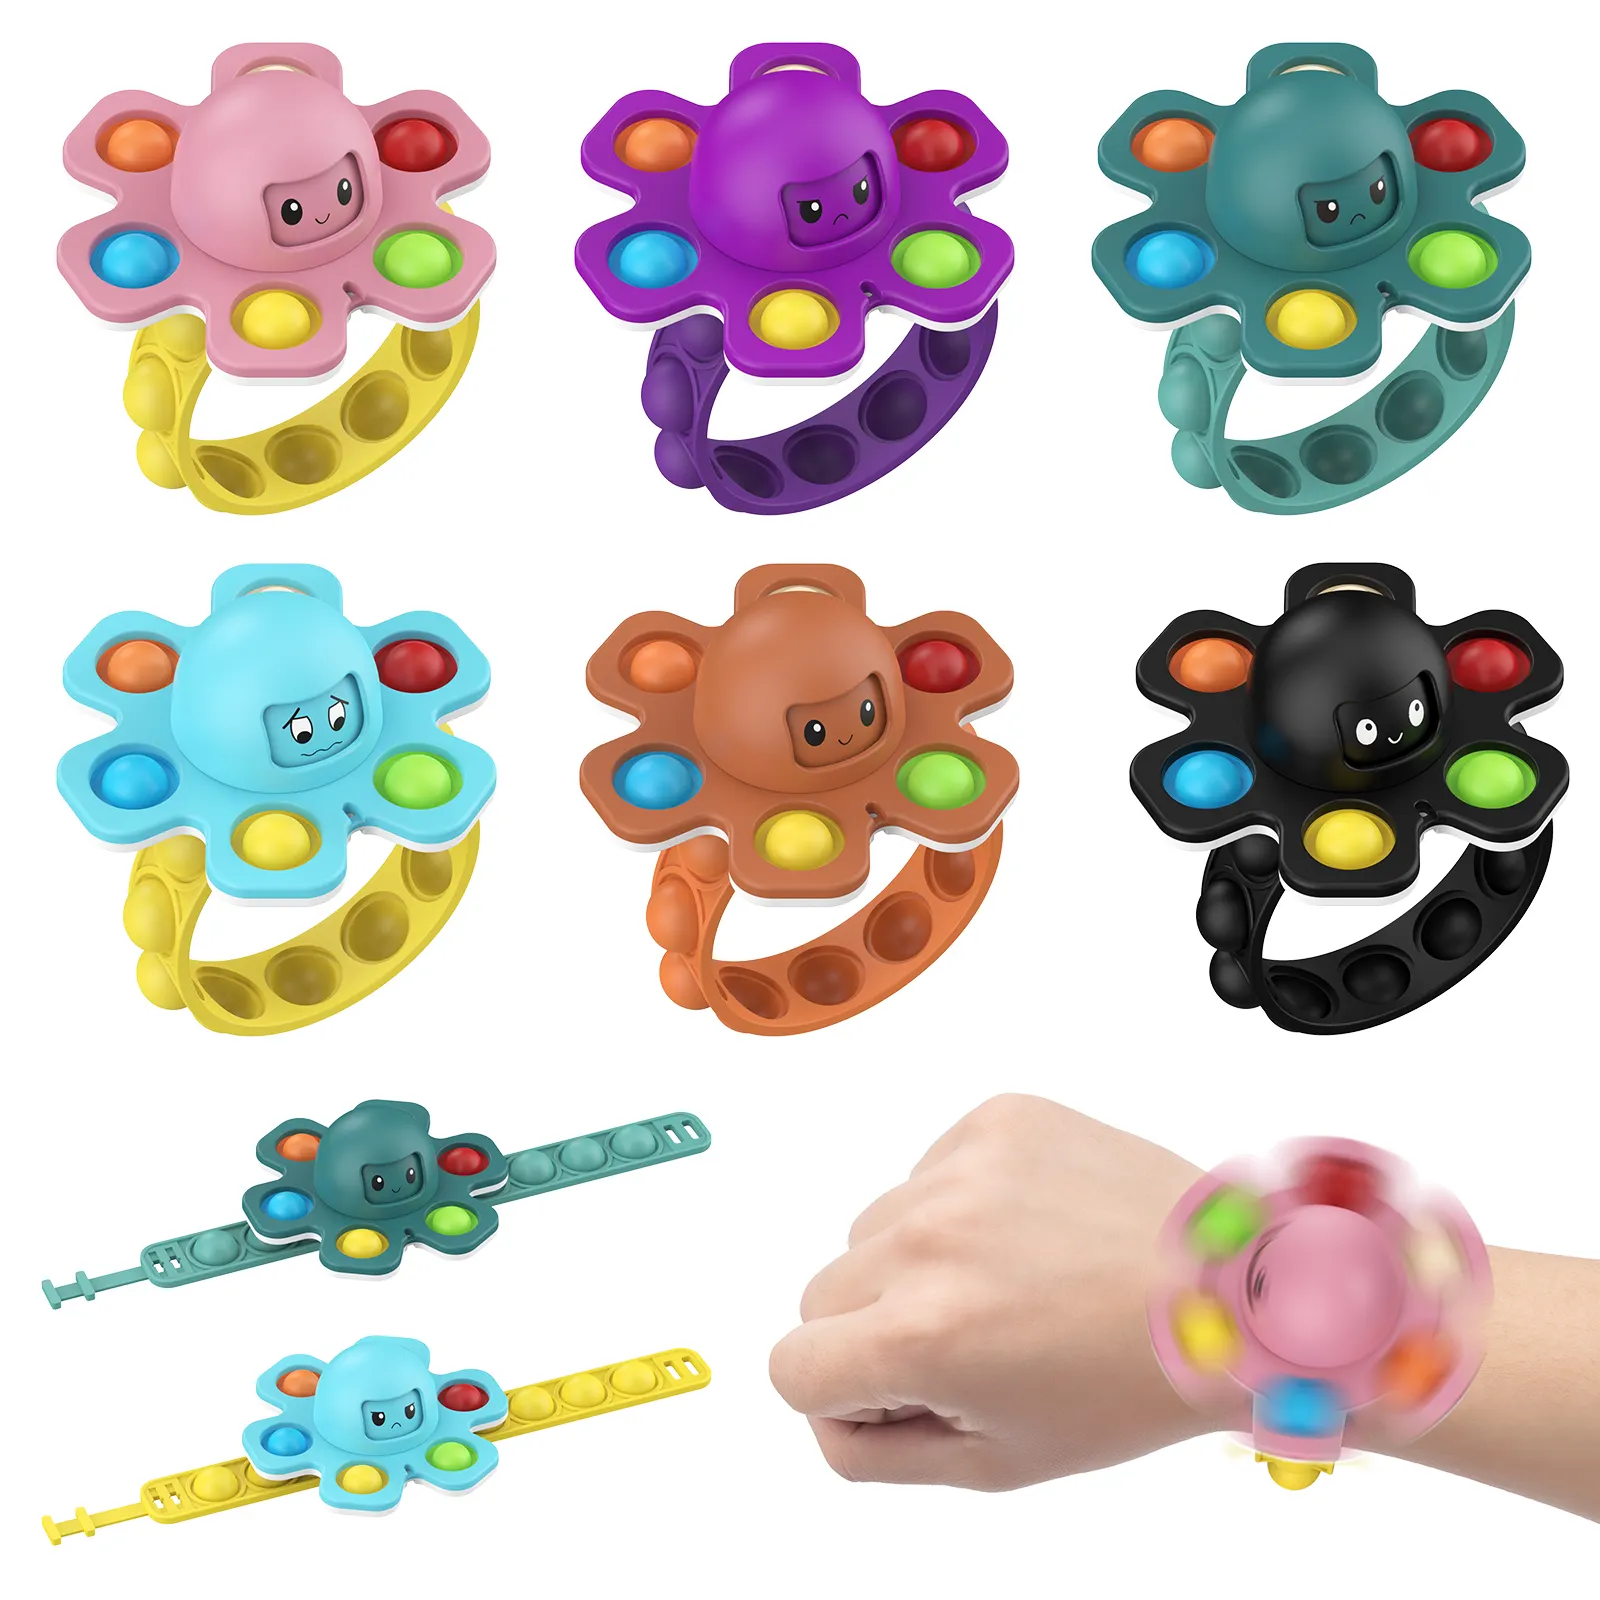 Pop Squid game Fidget Toys with wristband Octopus Face-Changing Toy Stress Relief Fidget Push Bubble Popsits Sensory Poppet